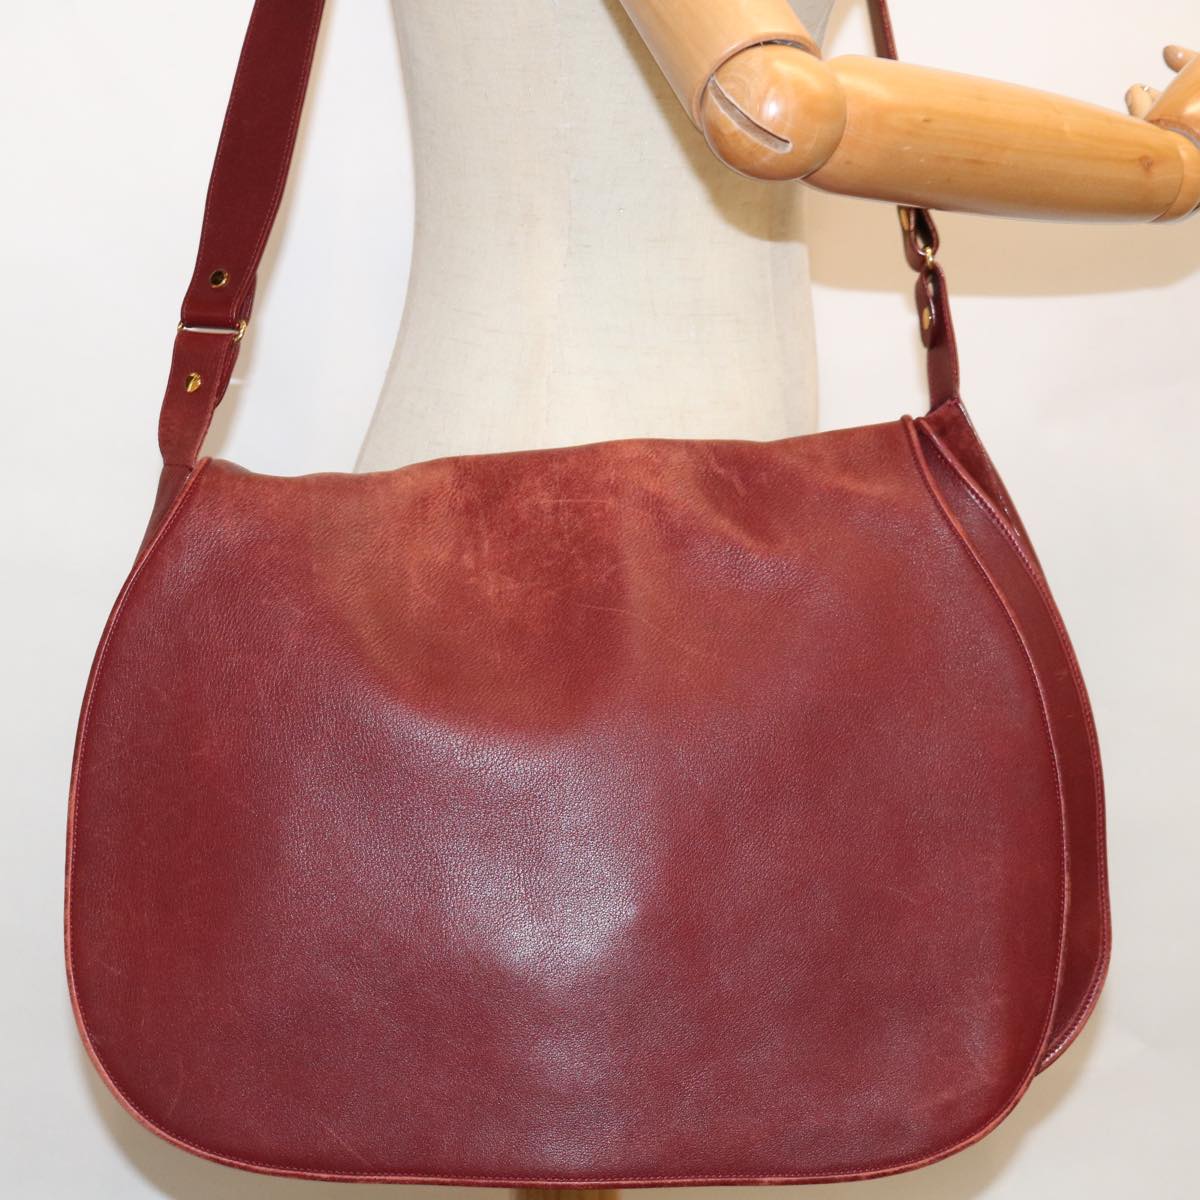 CARTIER Shoulder Bag Leather Red Auth 65273